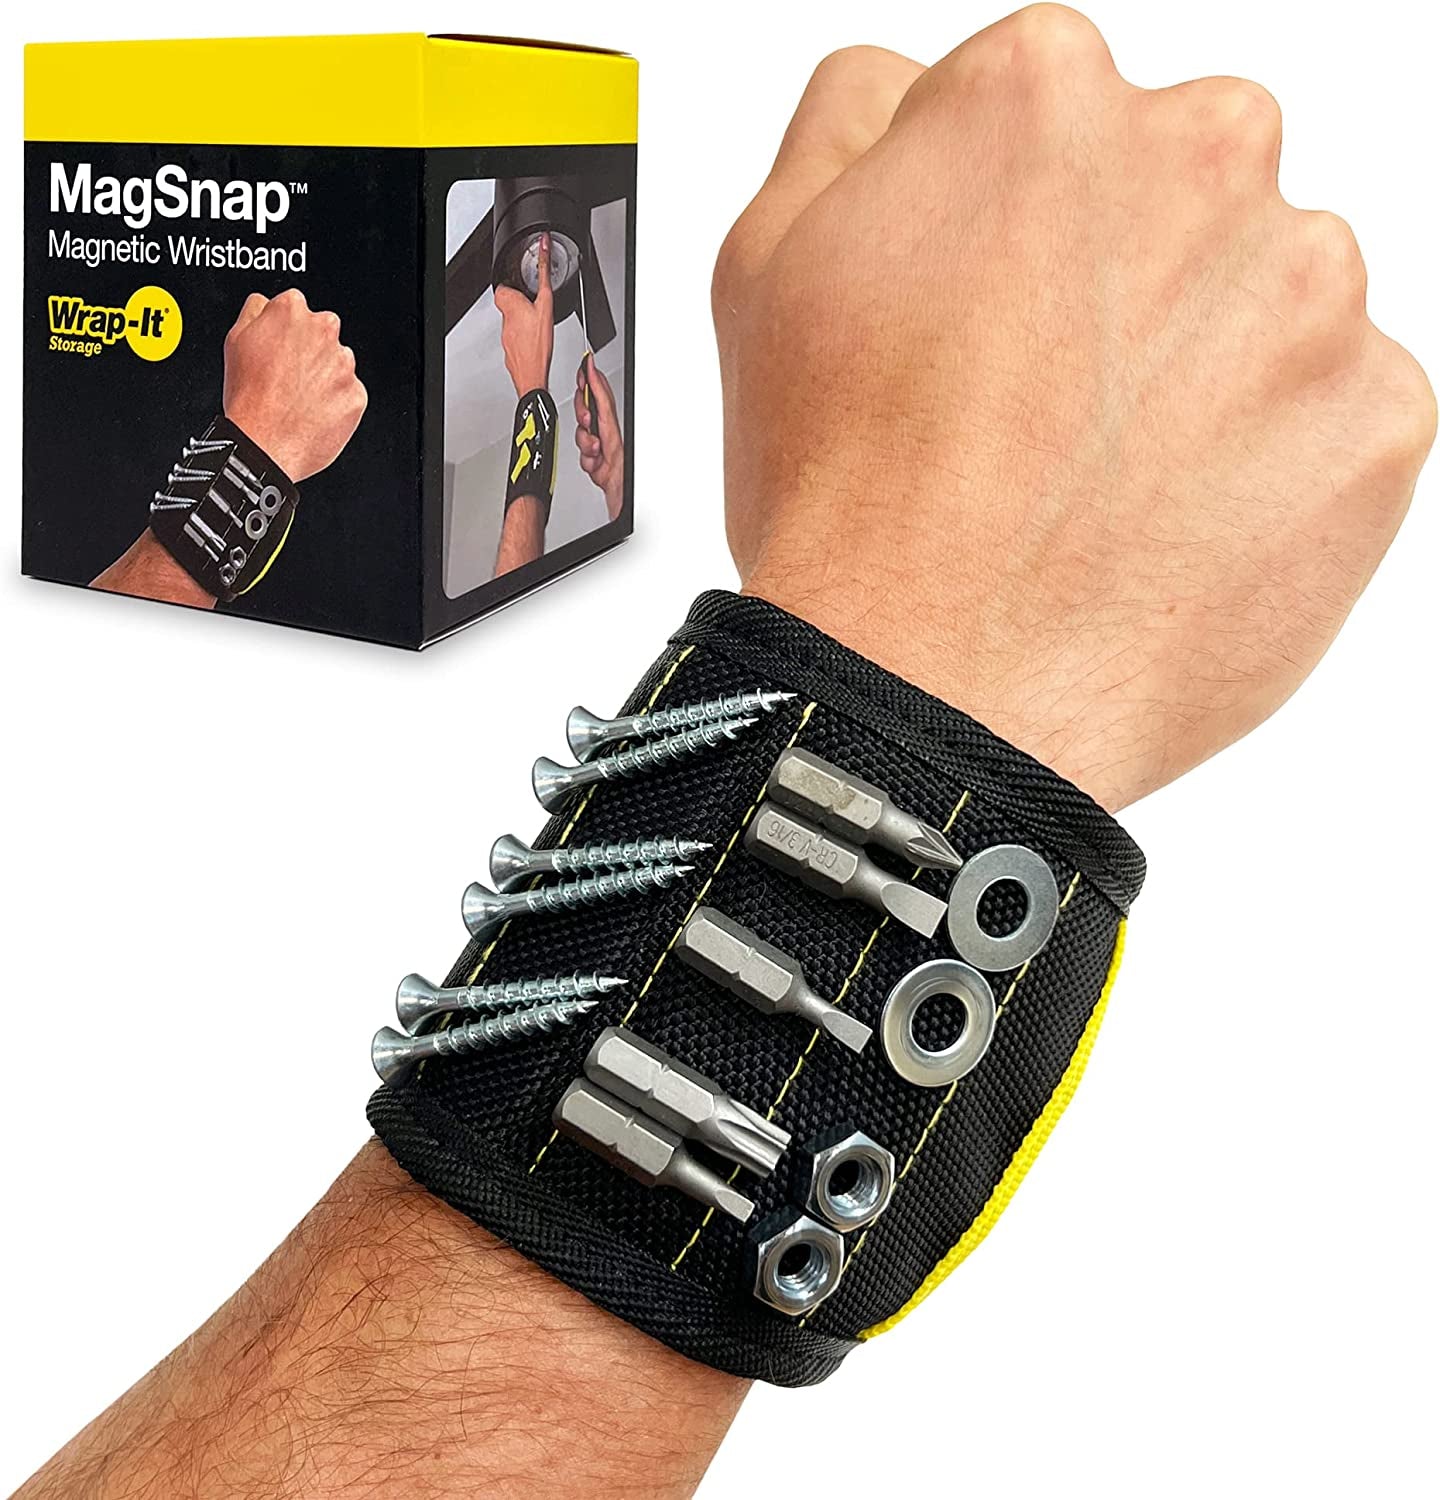 Magsnap Magnetic Wristband by - Wrist Magnet Tool and Screw Holder - T